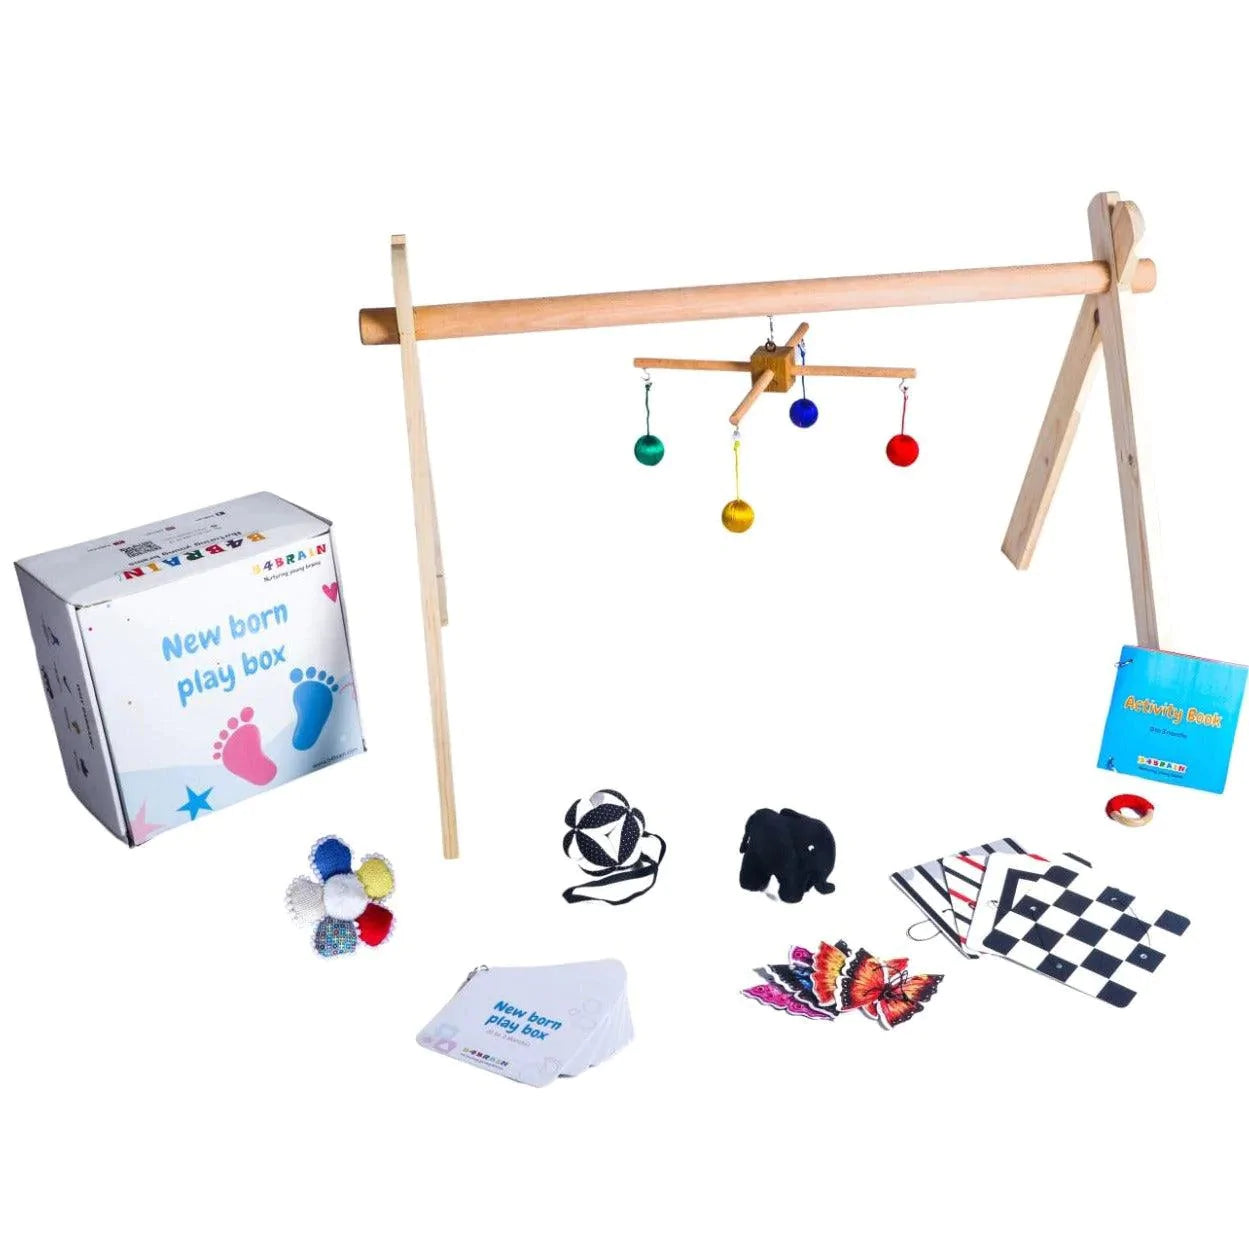 Buy Essential New Born Play Box for 0-3 Months Babies - SkilloToys.com